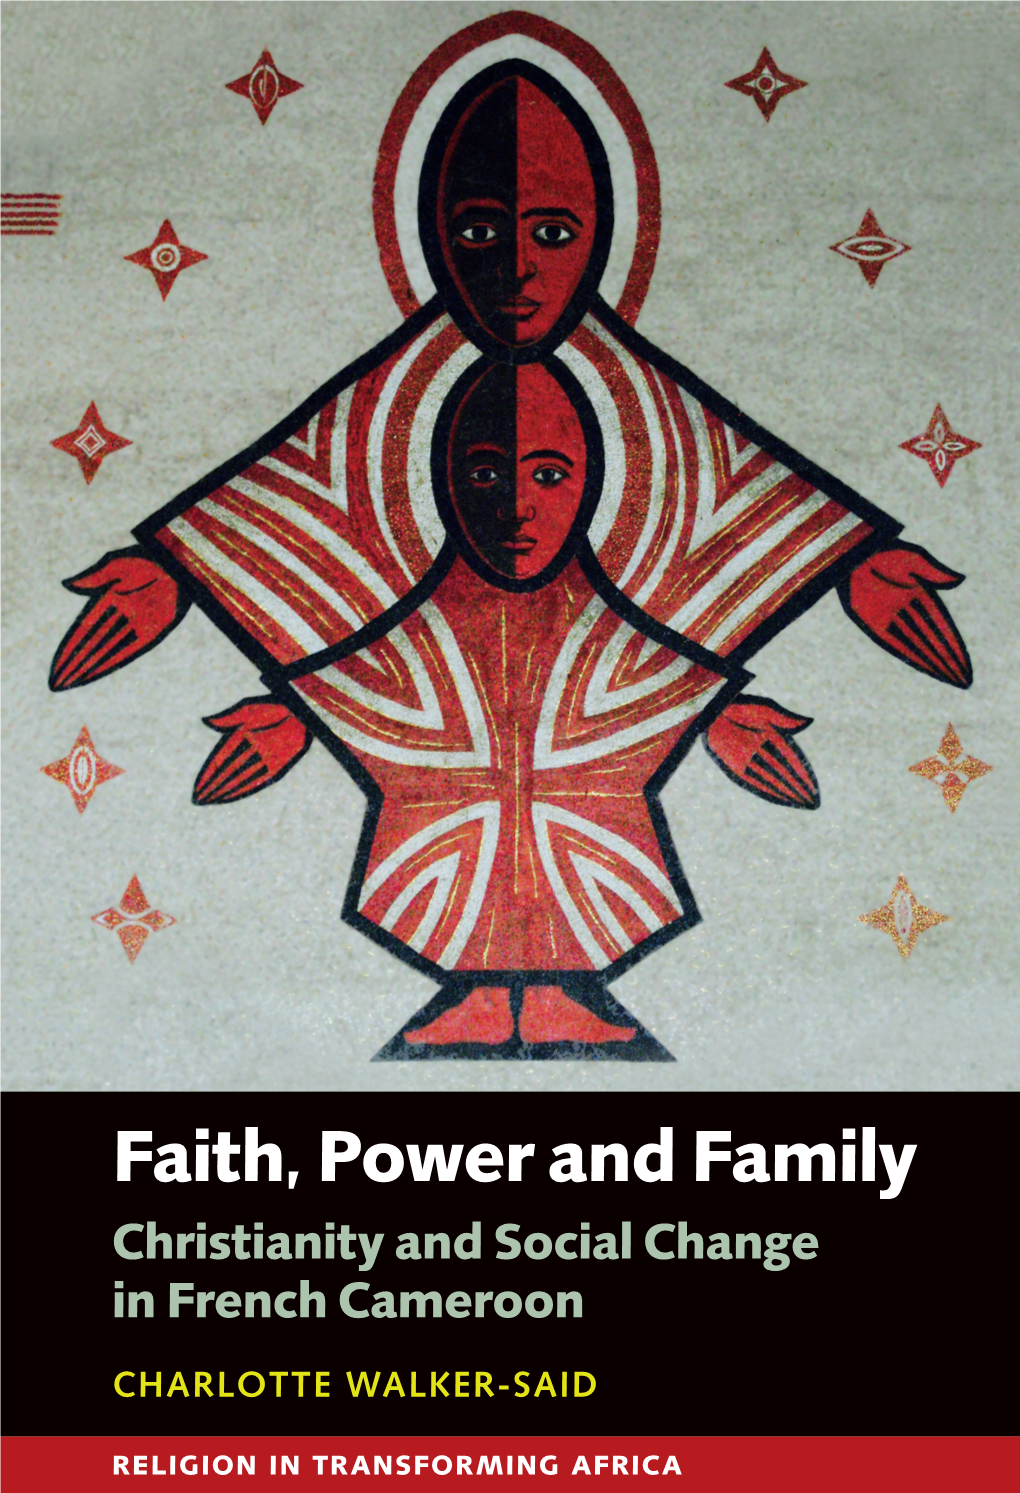 Faith, Power and Family Christianity and Social Change in French Cameroon